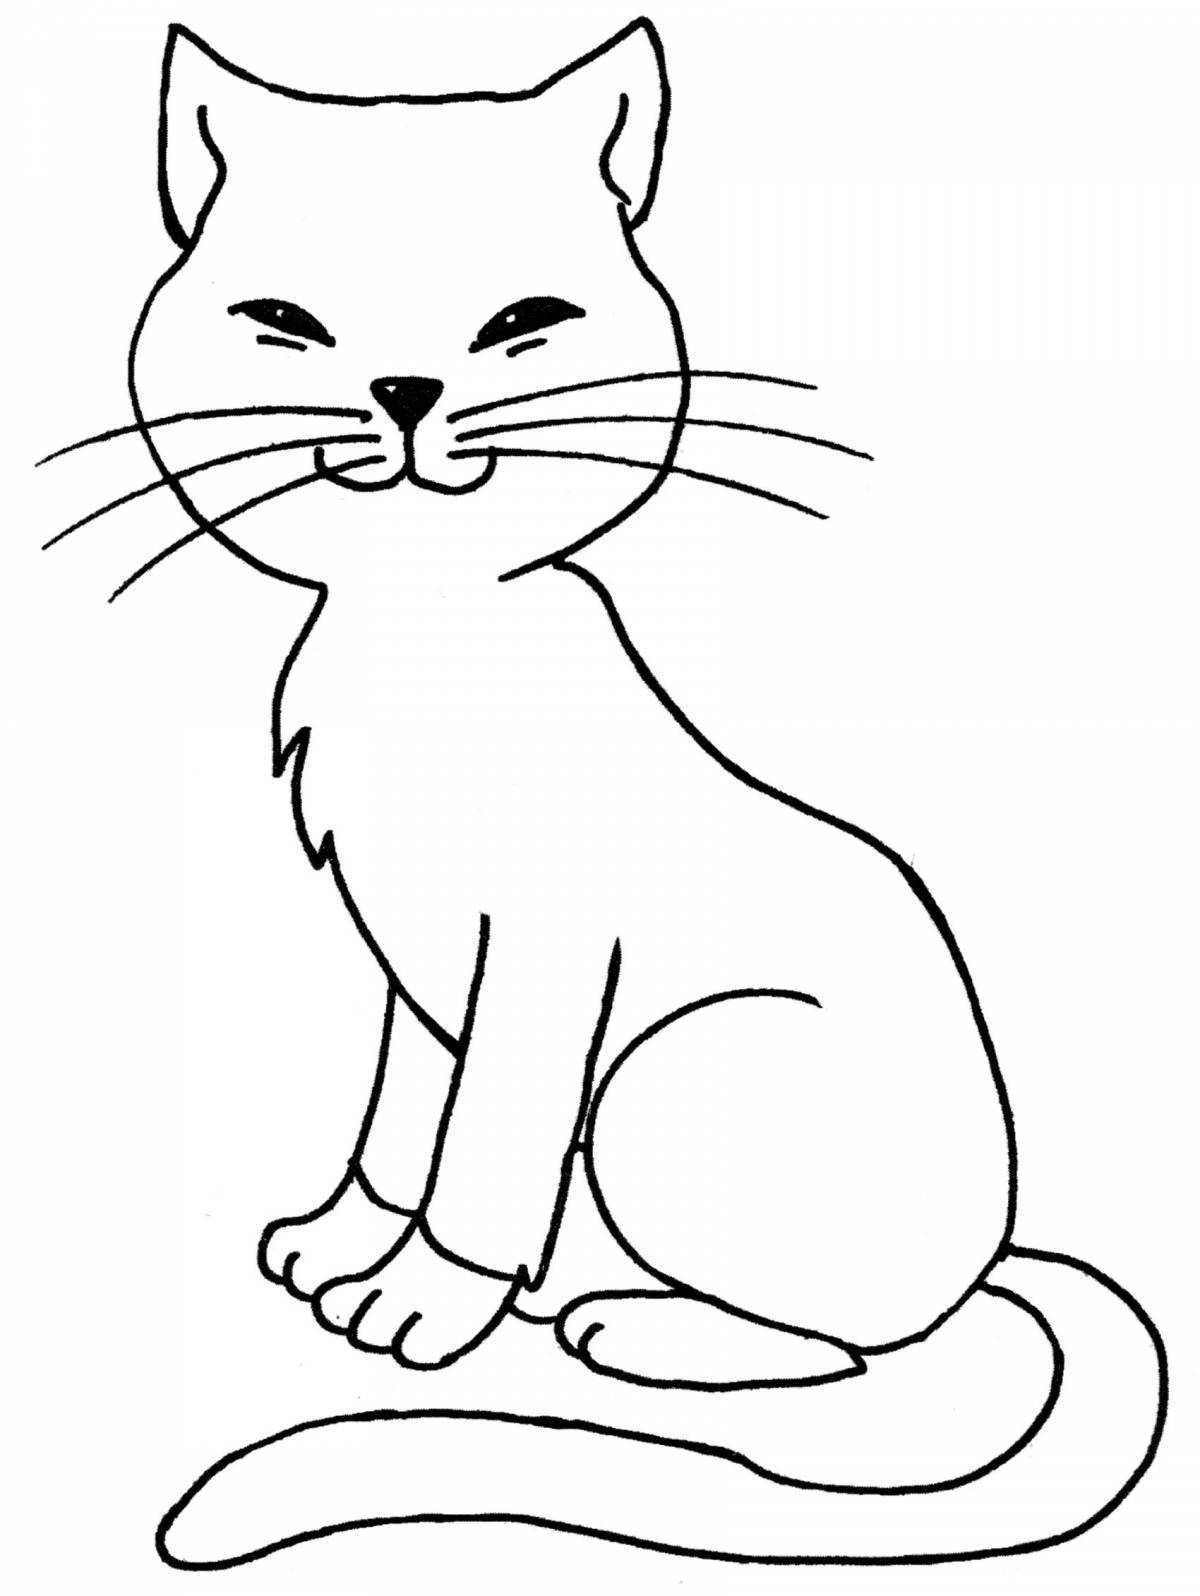 Sweet cat coloring pages for kids